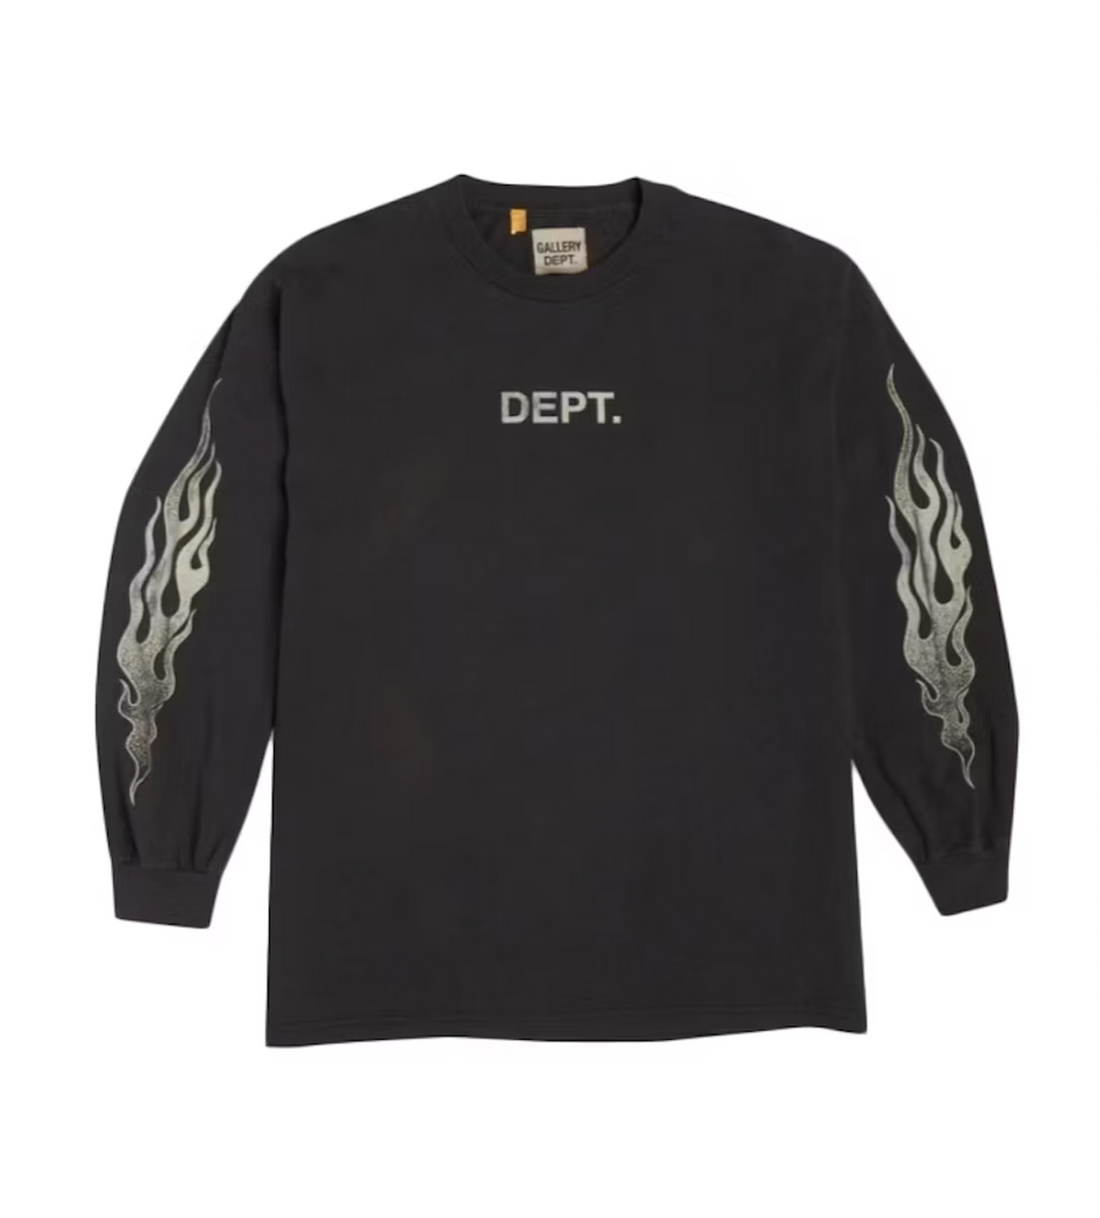 Gallery Dept L/S Flame